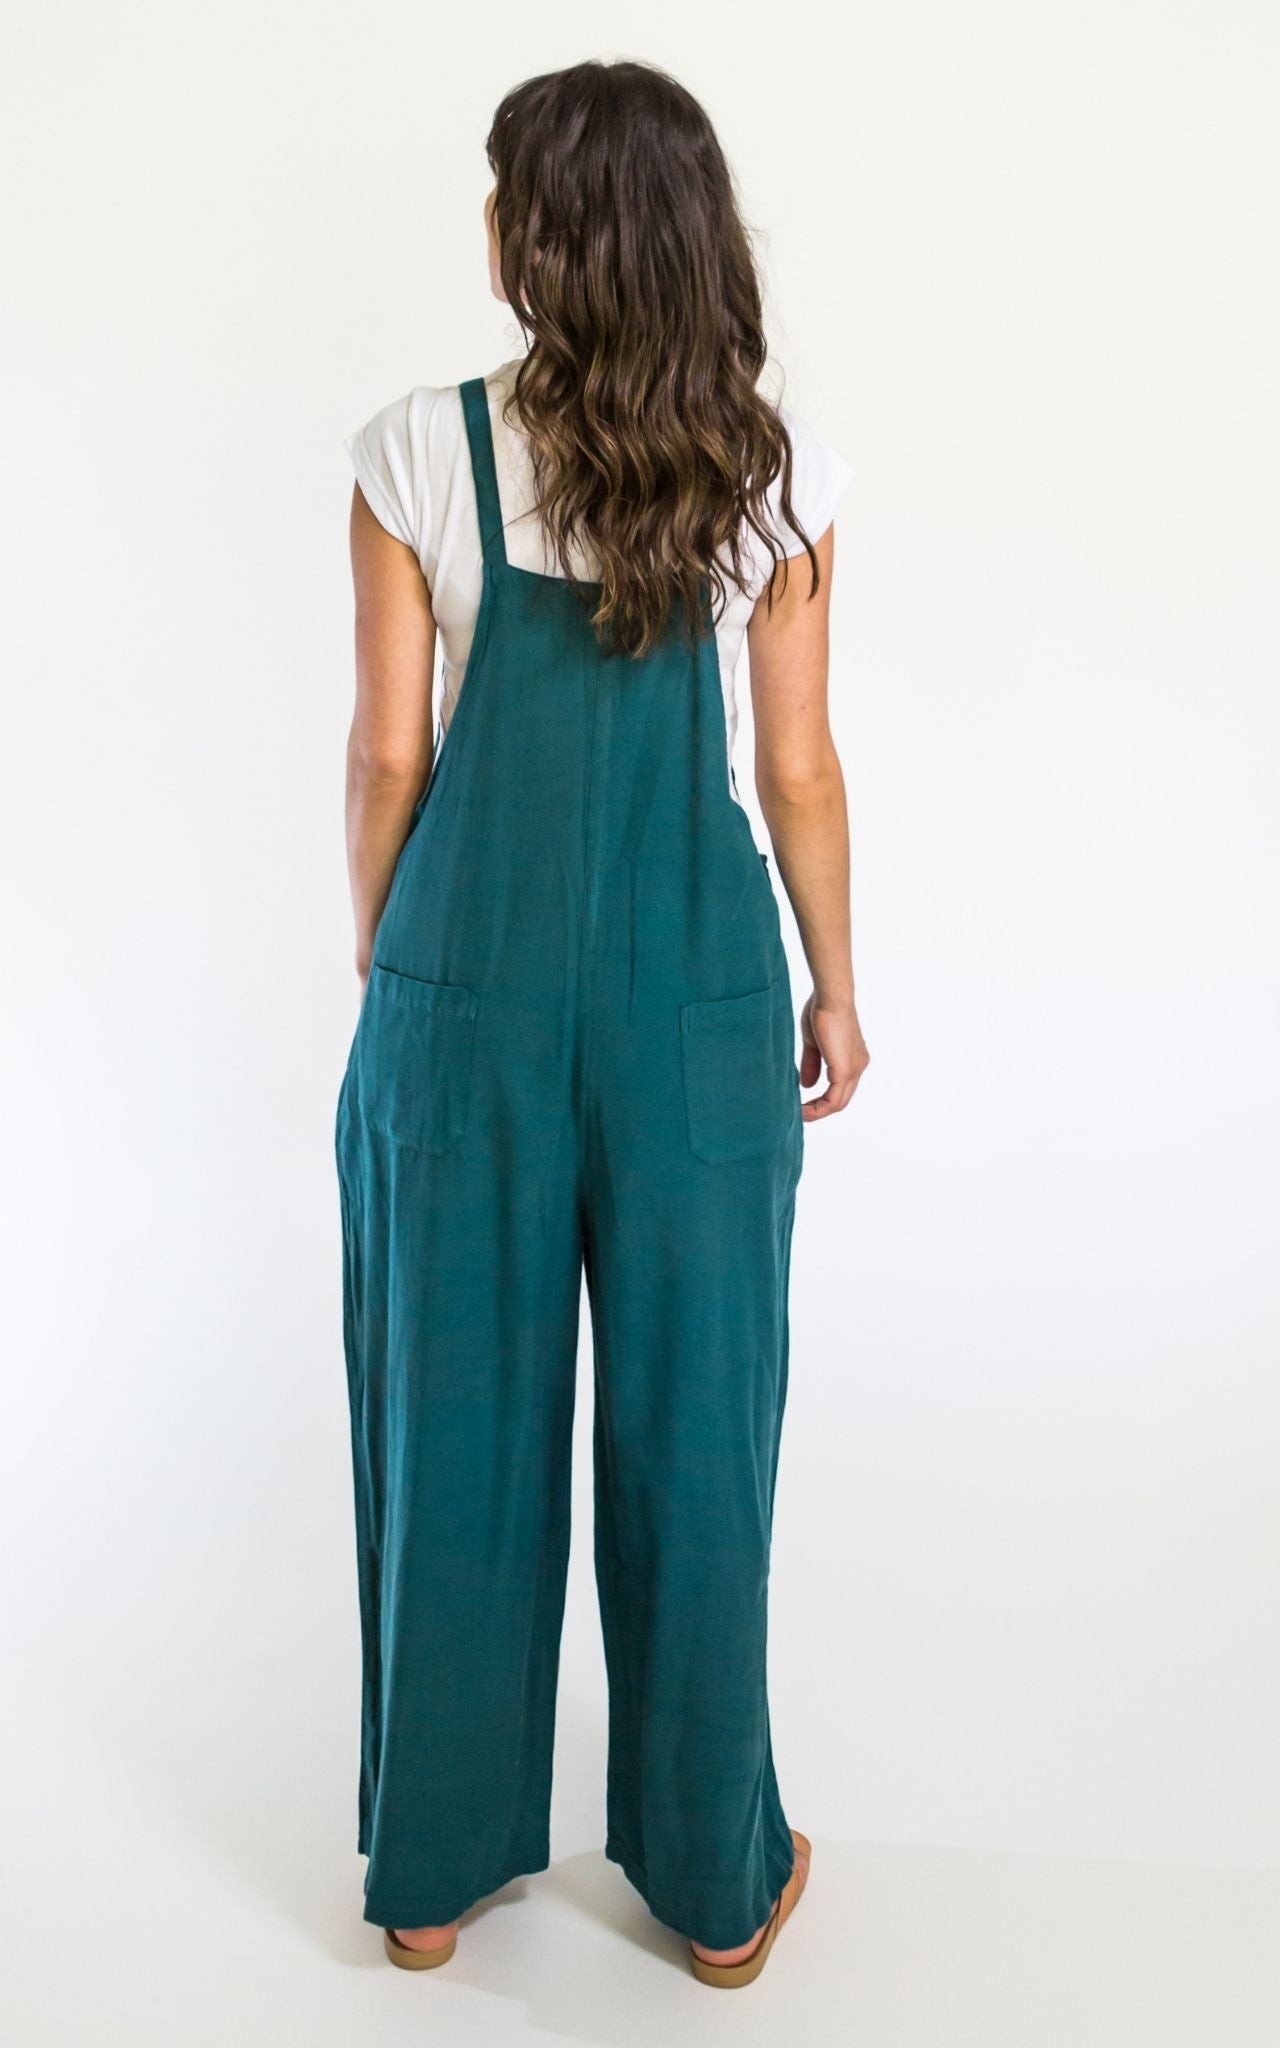 Surya Australia Ethical Cotton 'Juanita' Overalls Dungarees made in Nepal - Turquoise